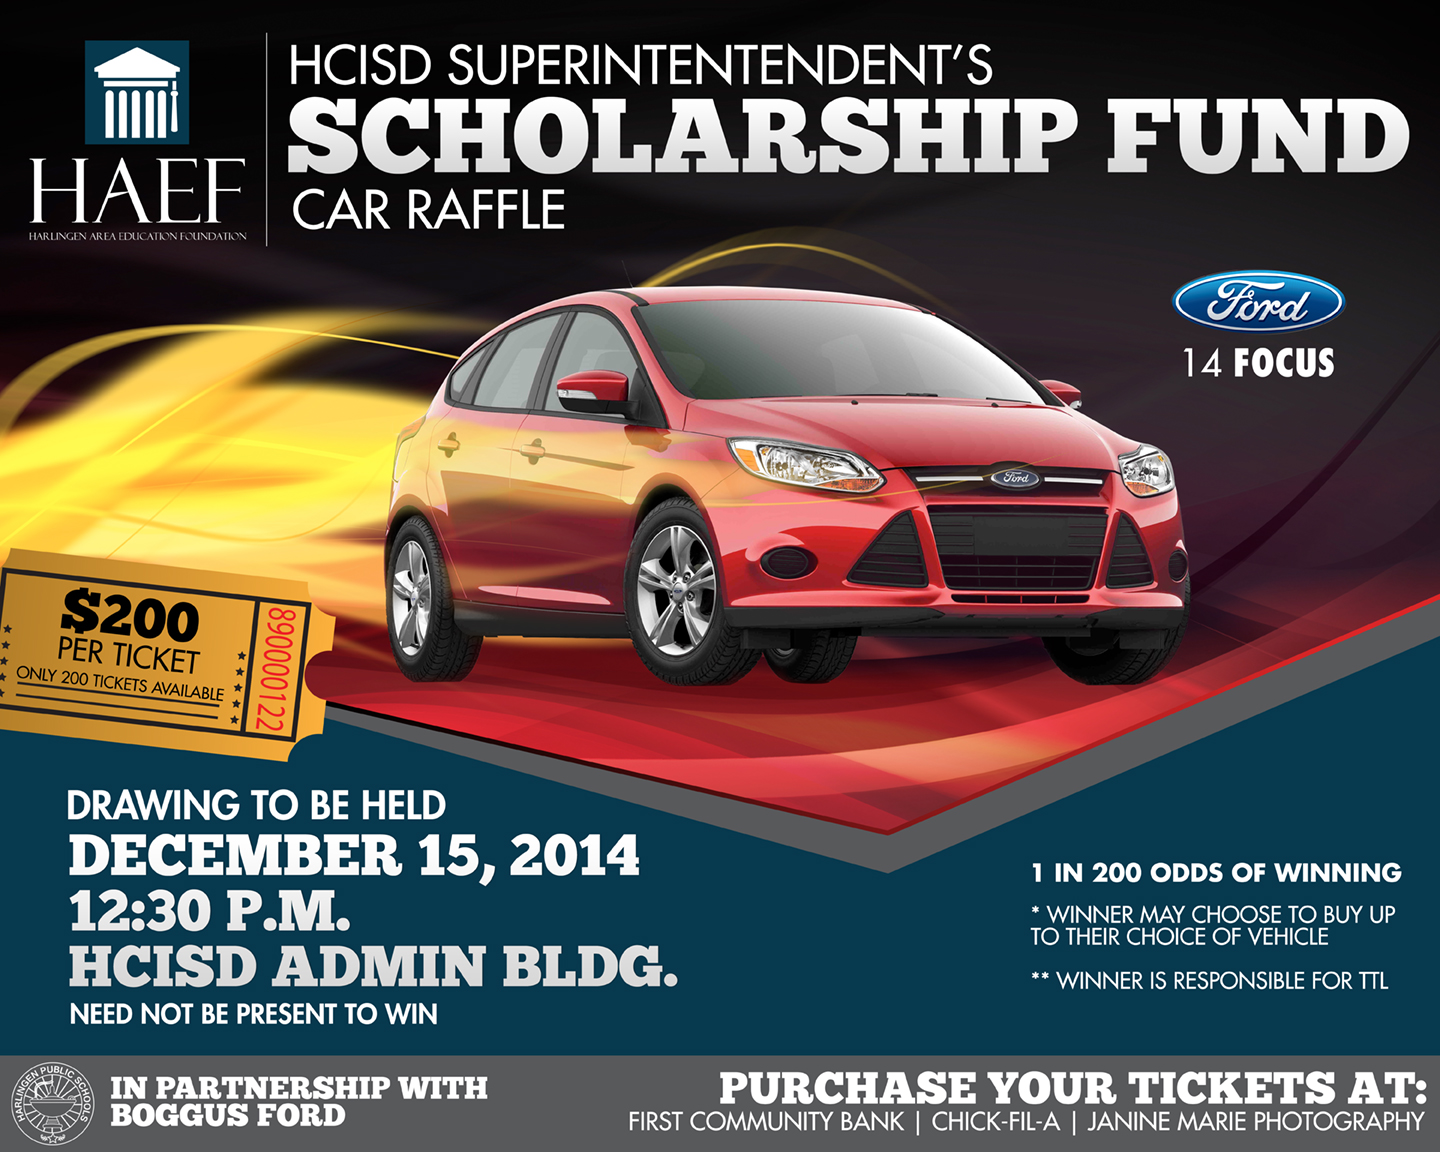 HAEF hosts raffle to raise funds for HCISD Superintendent’s Scholarship Fund